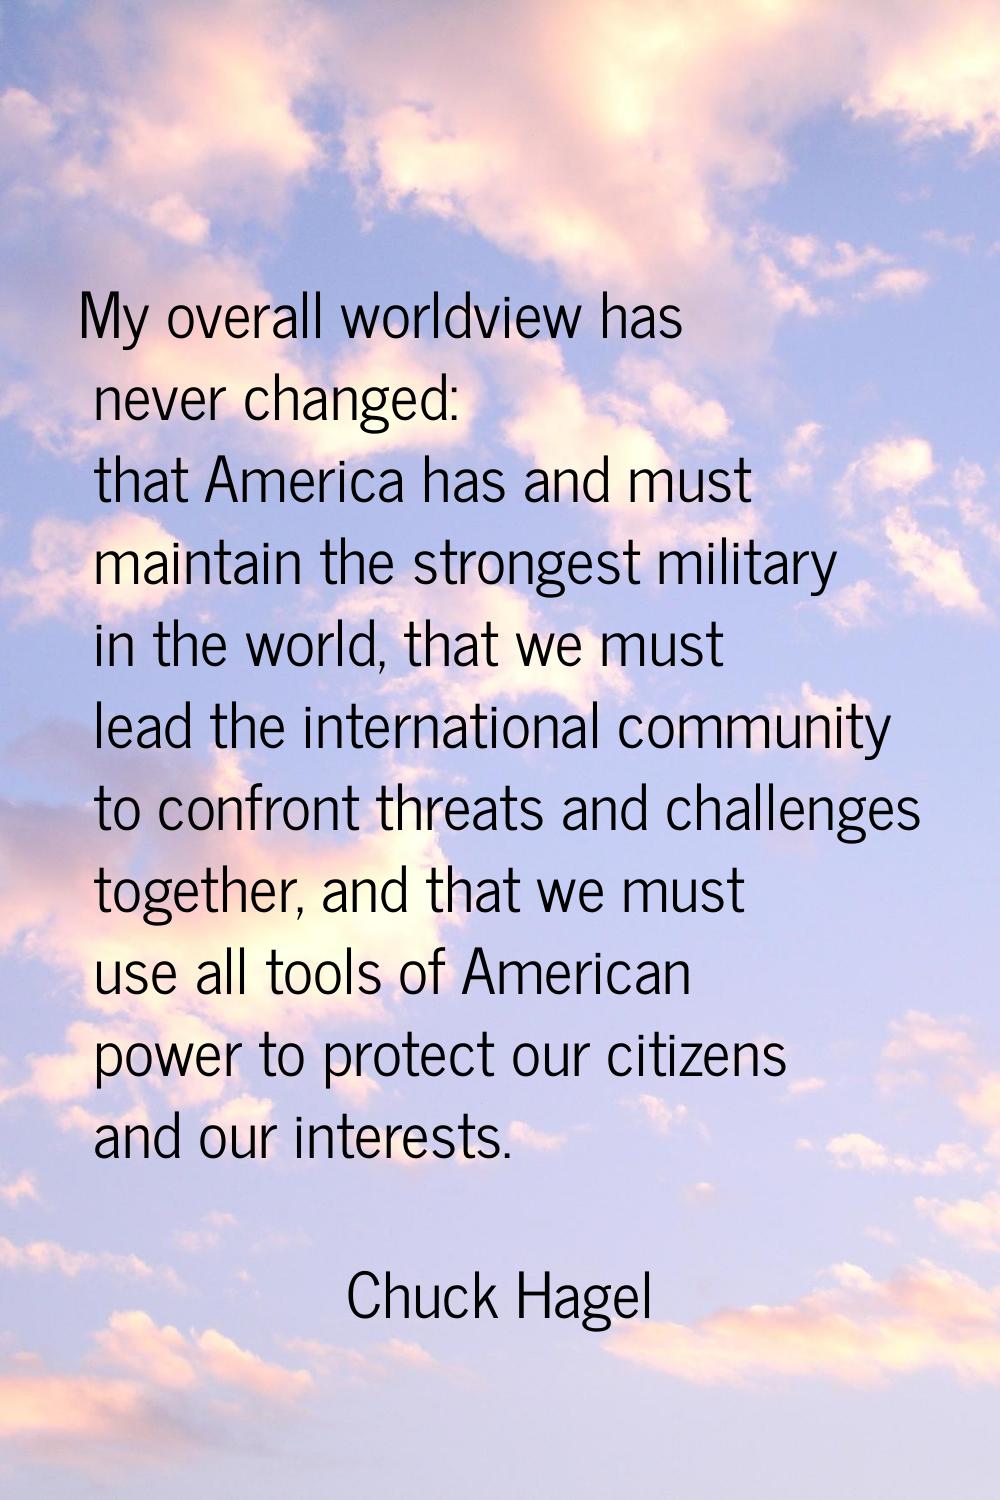 My overall worldview has never changed: that America has and must maintain the strongest military i